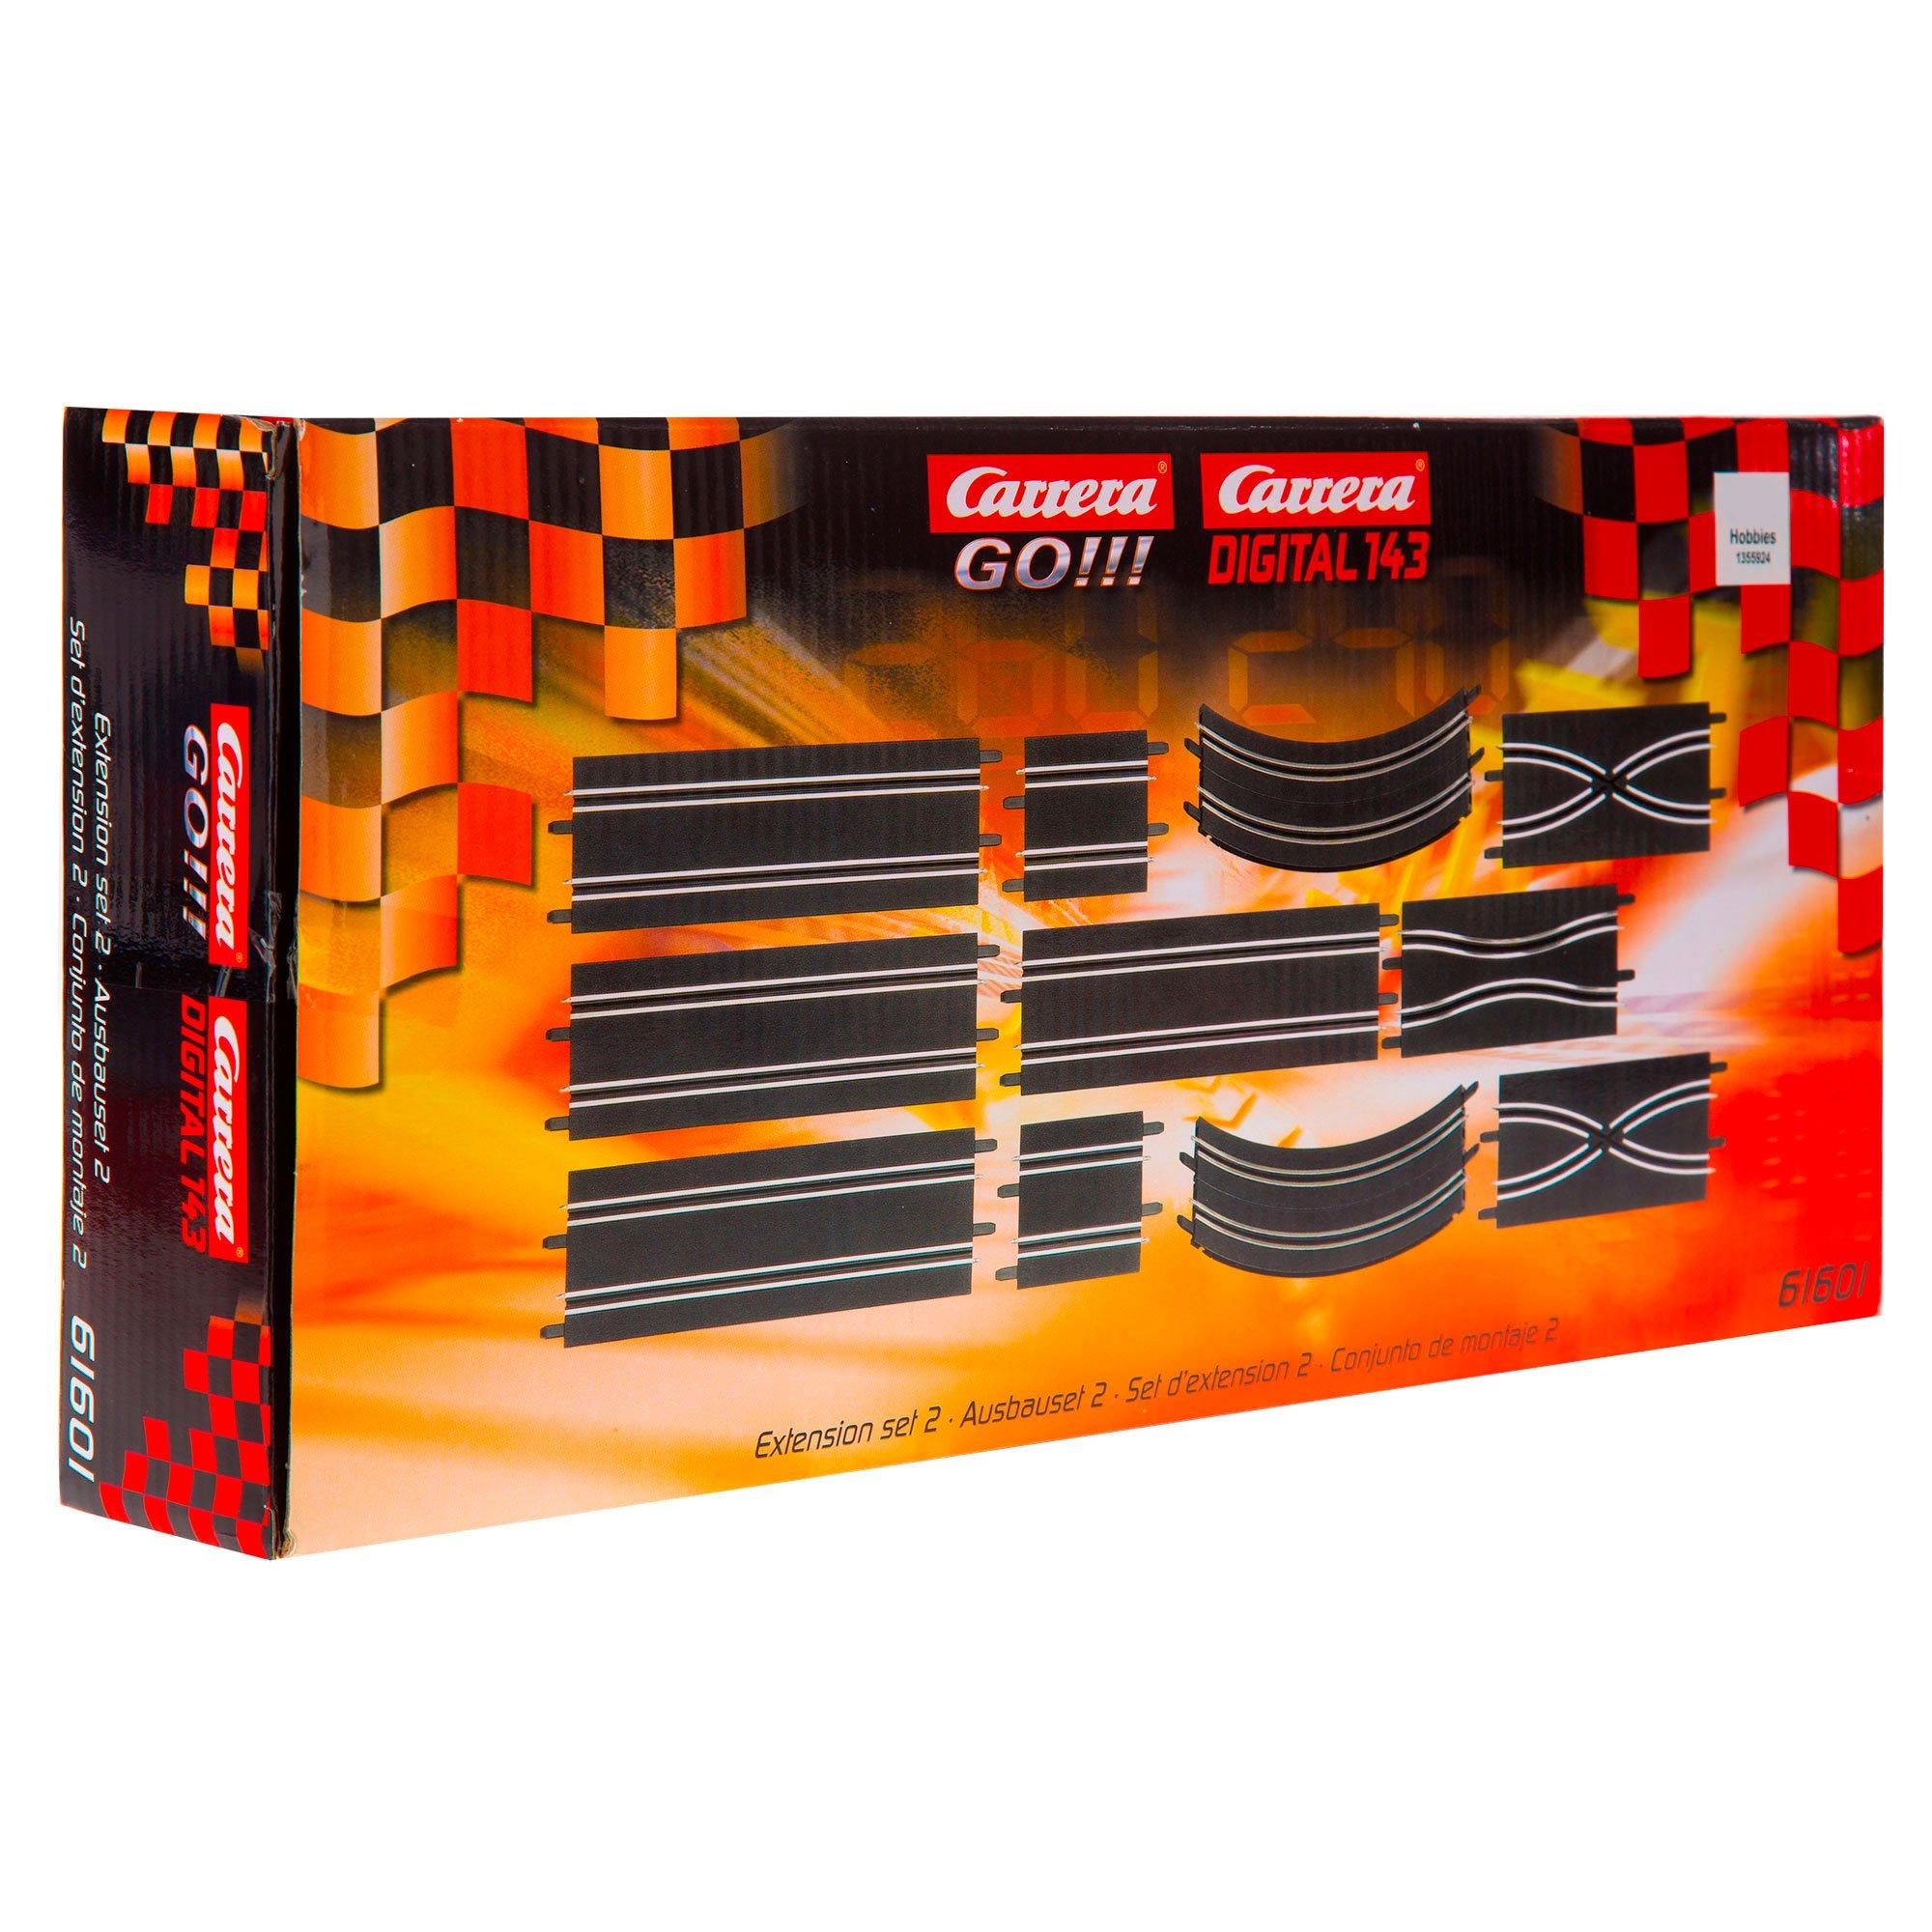  Carrera Go!!! Extension Set #2 - 11Piece Track Expansion  Accessory Pack - for Use with 1: 43 Scale Go!!! & Digital143 Slot Car  Racetrack Systems : Toys & Games